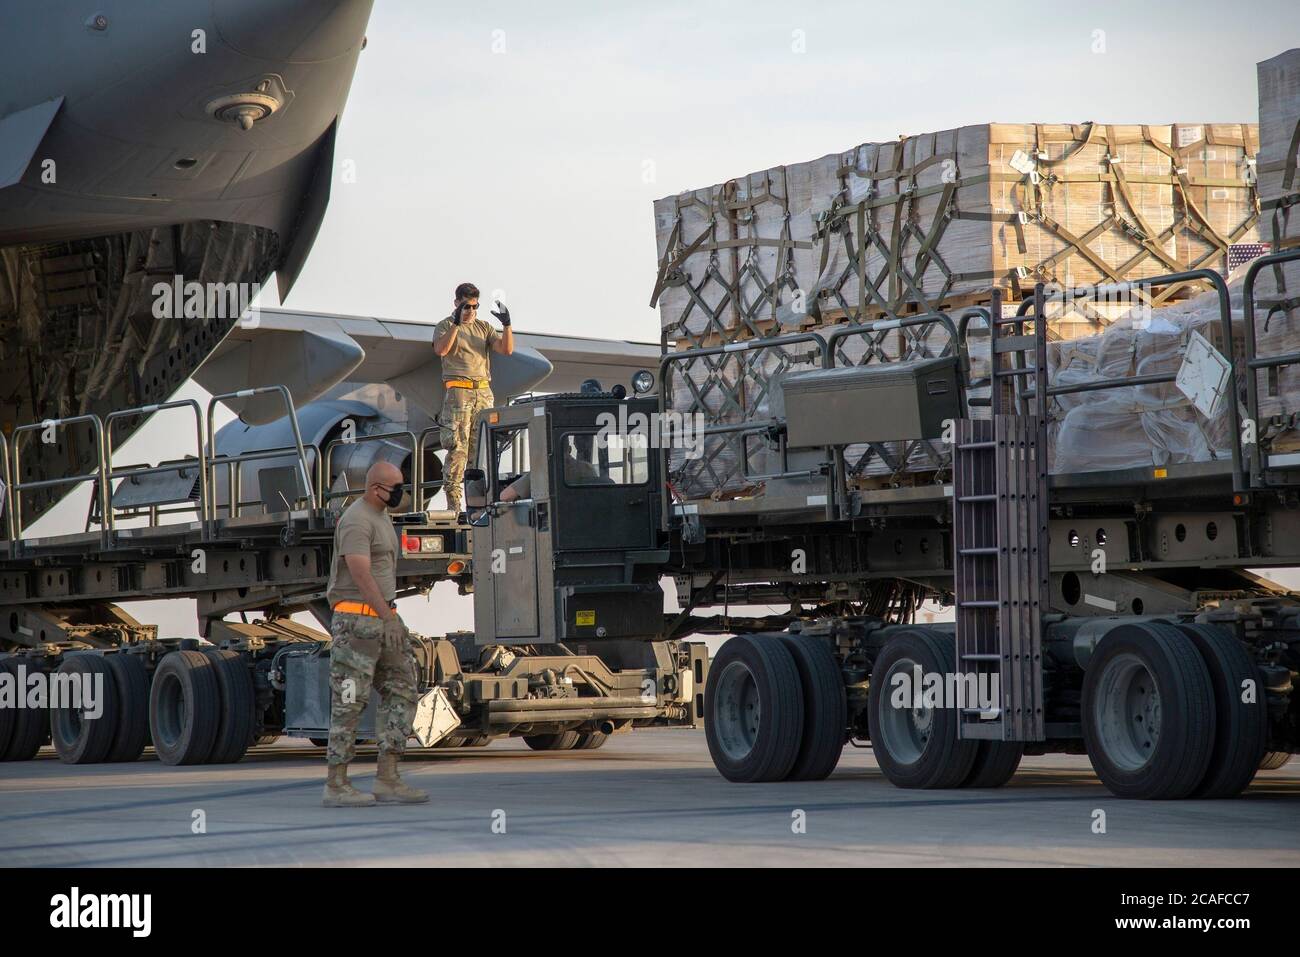 U.S. Air Force Airmen load humanitarian aid supplies a U.S. Air Force C-17 Globemaster III at Al Udeid Air Base, Qatar, Aug. 6, 2020, bound for Beirut, Lebanon. U.S. Central Command is coordinating with the Lebanese Armed Forces and U.S. Embassy-Beirut to transport critical supplies as quickly as possible to support the needs of the Lebanese people. (U.S. Air Force photo by Staff Sgt. Heather Fejerang) Stock Photo